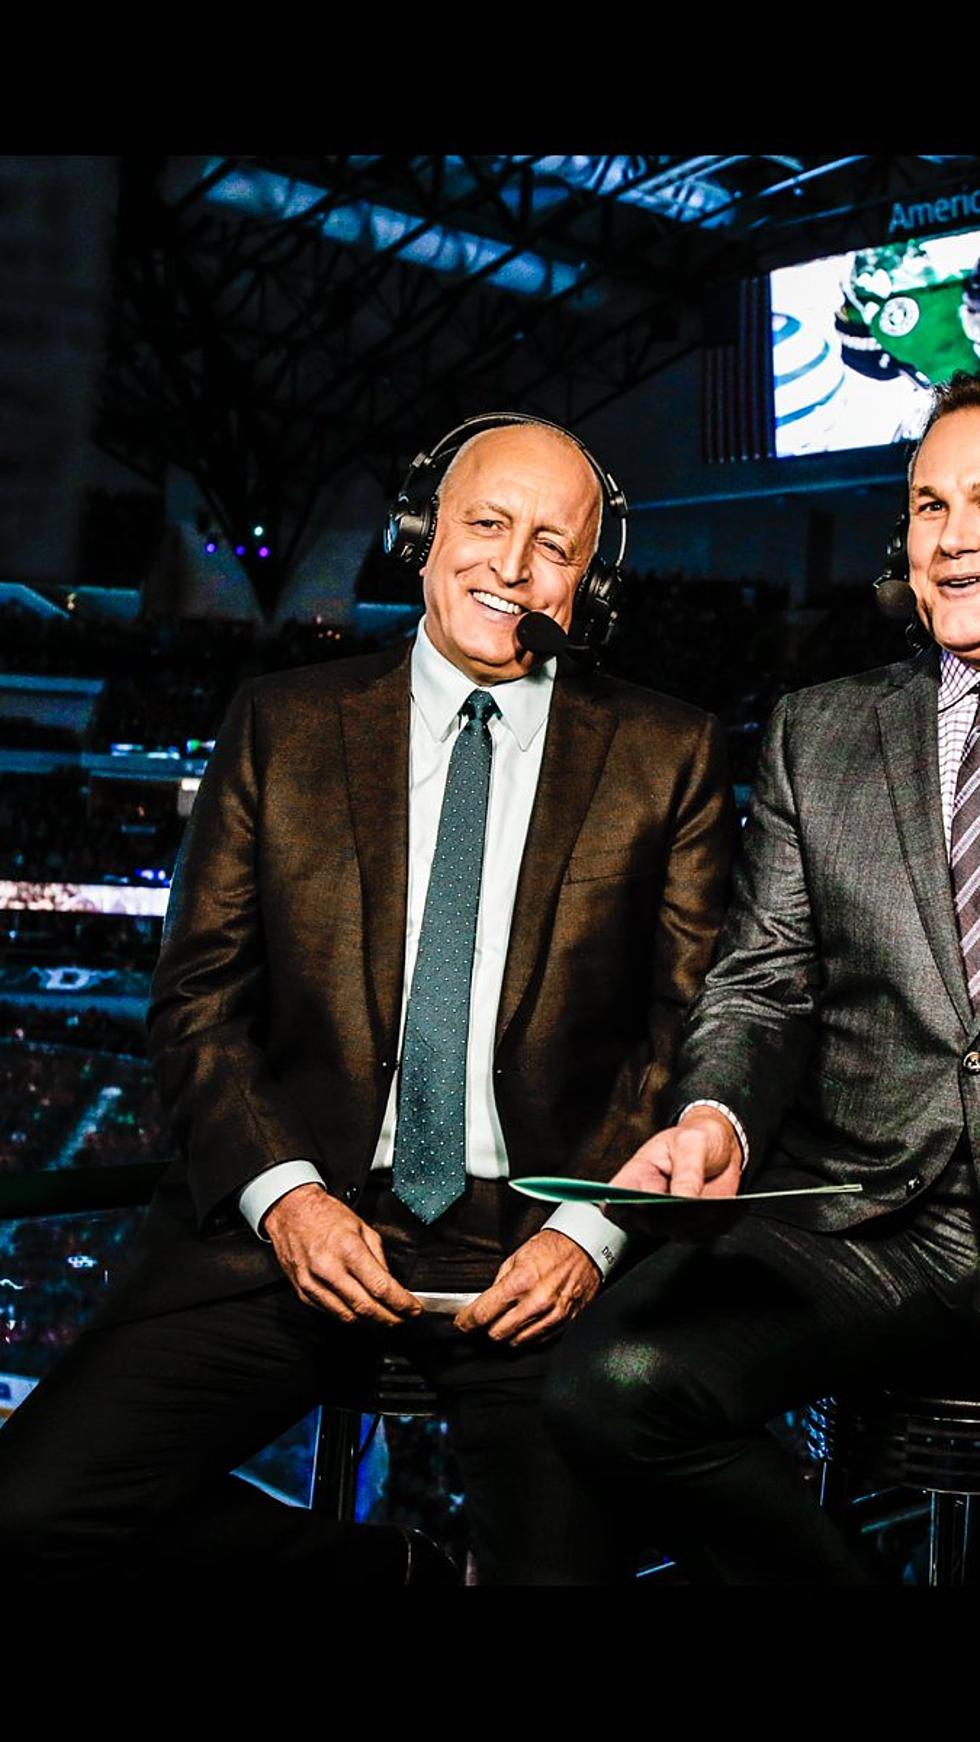 Dallas Stars Broadcaster Passes Away After Battle with Cancer